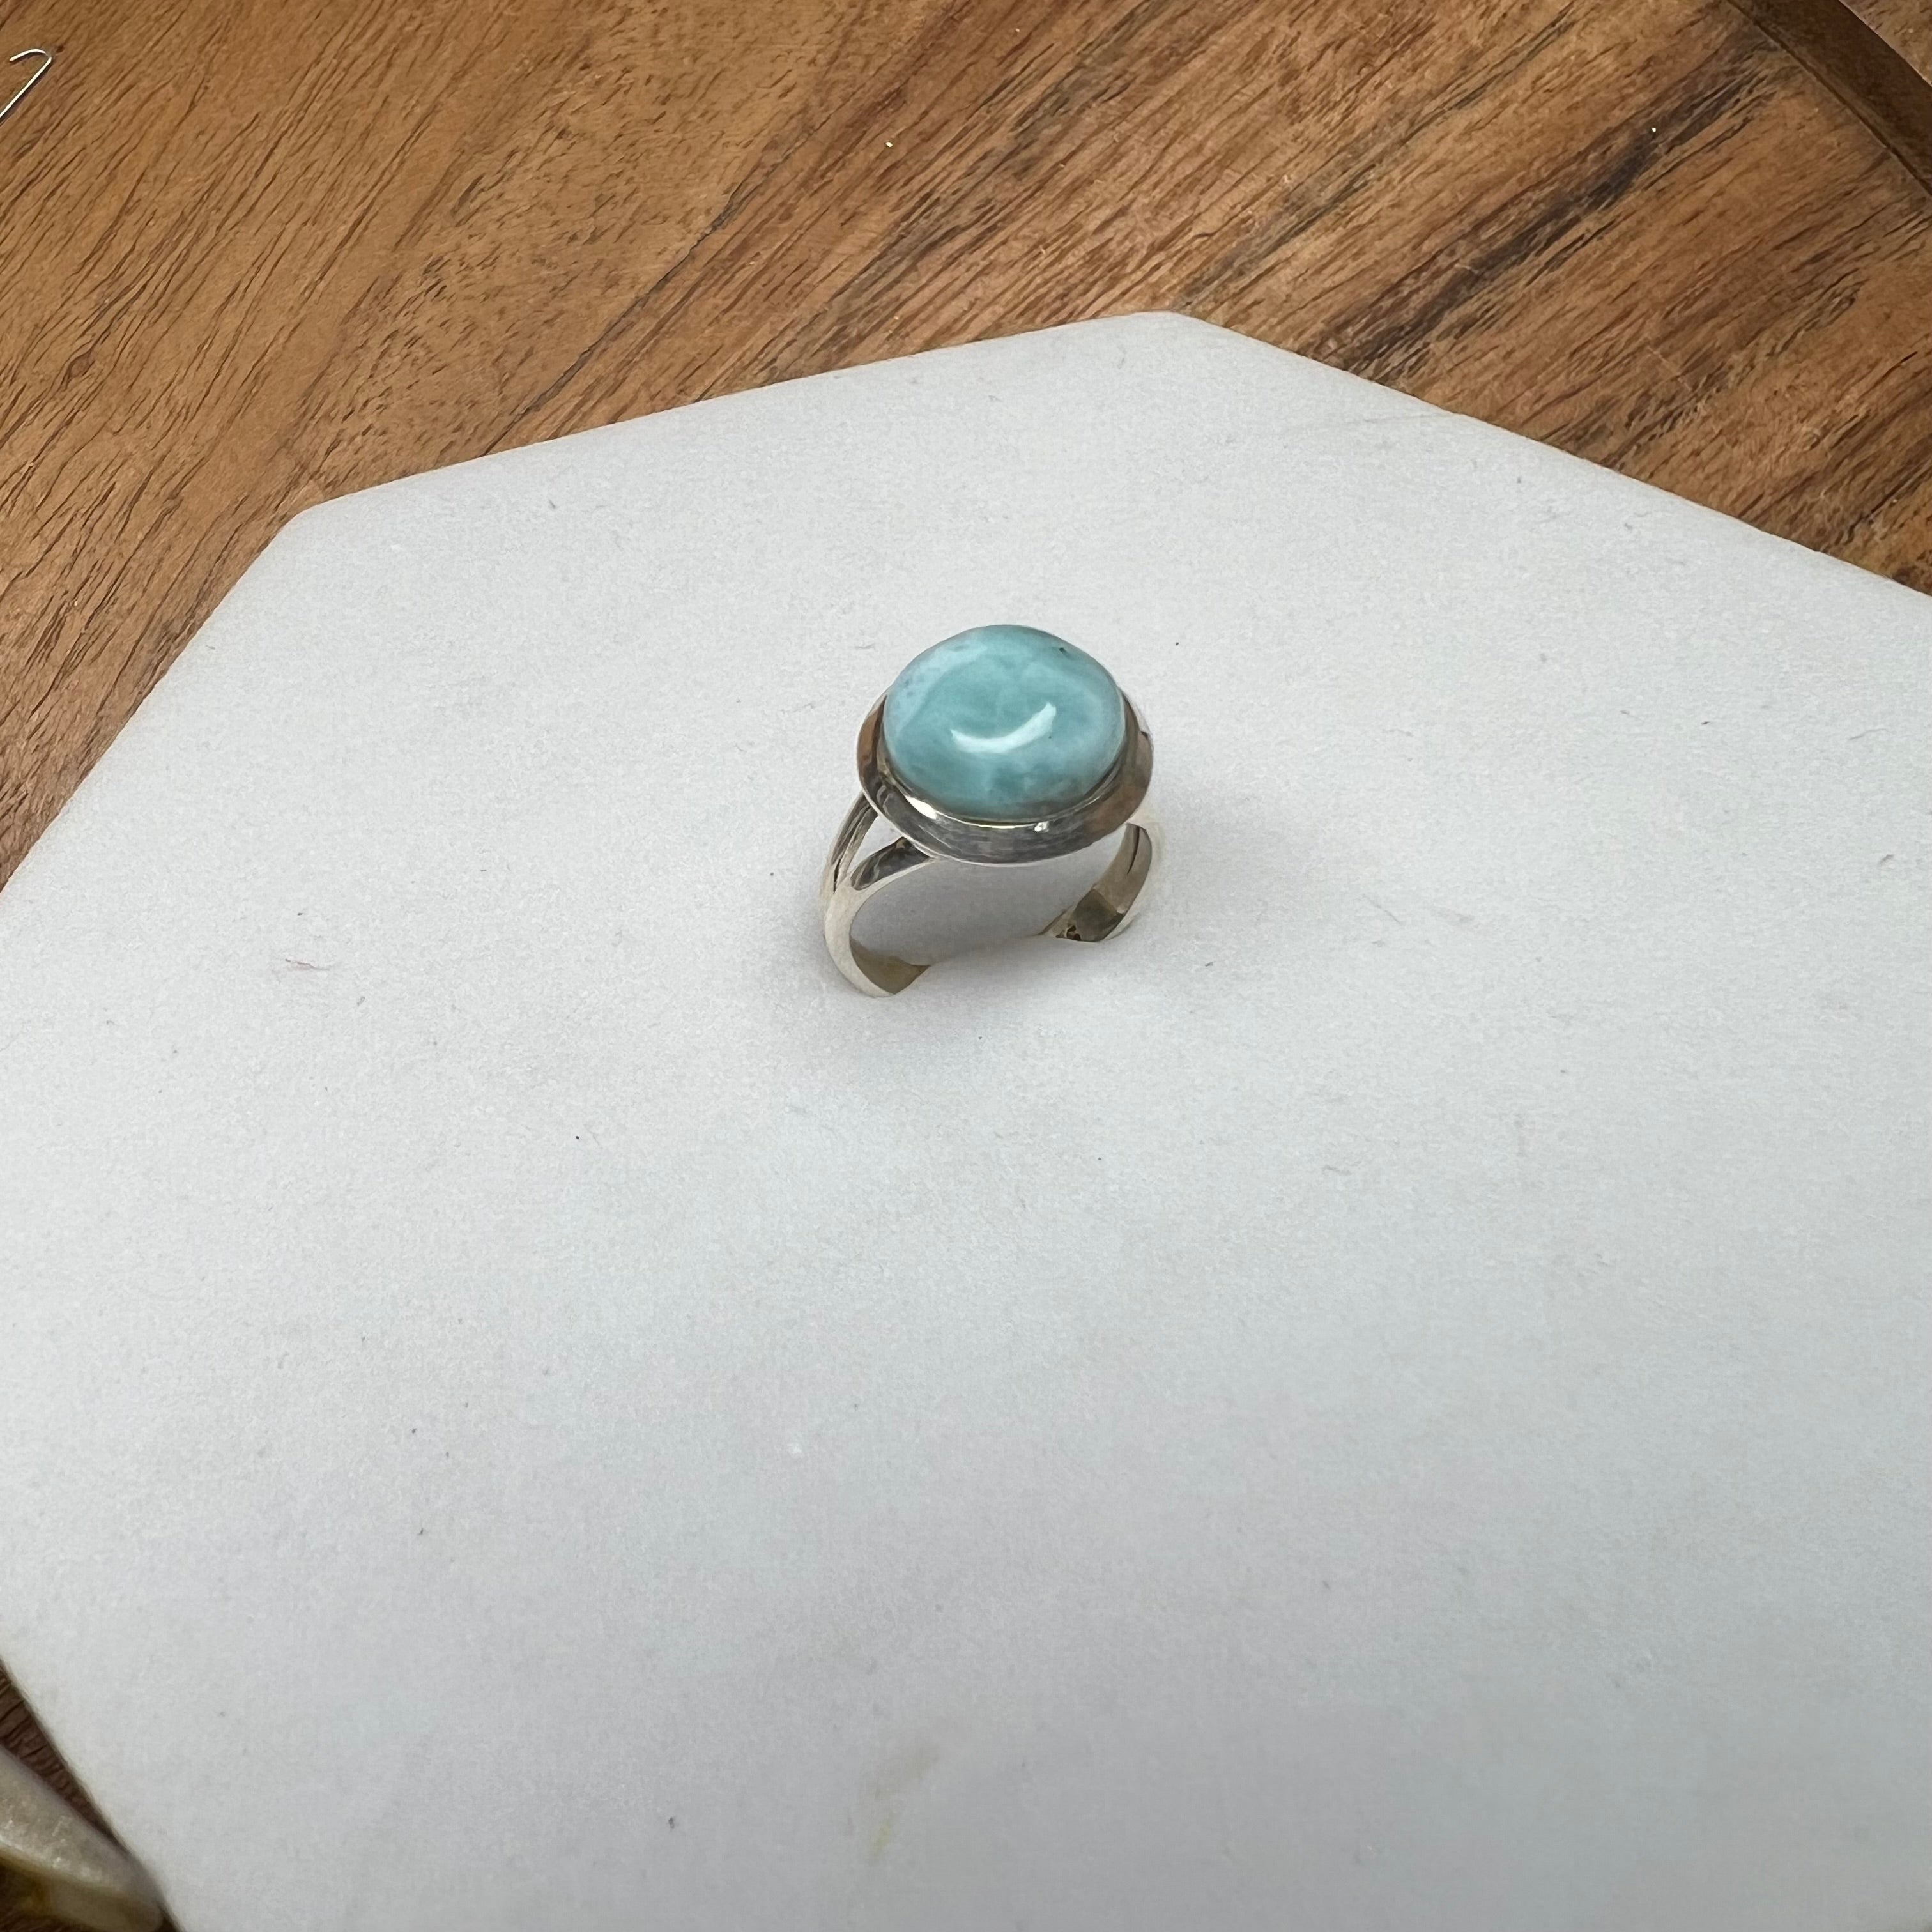 HANDCRAFTED LARIMAR RING IN SILVER 925 (SIZE 5)